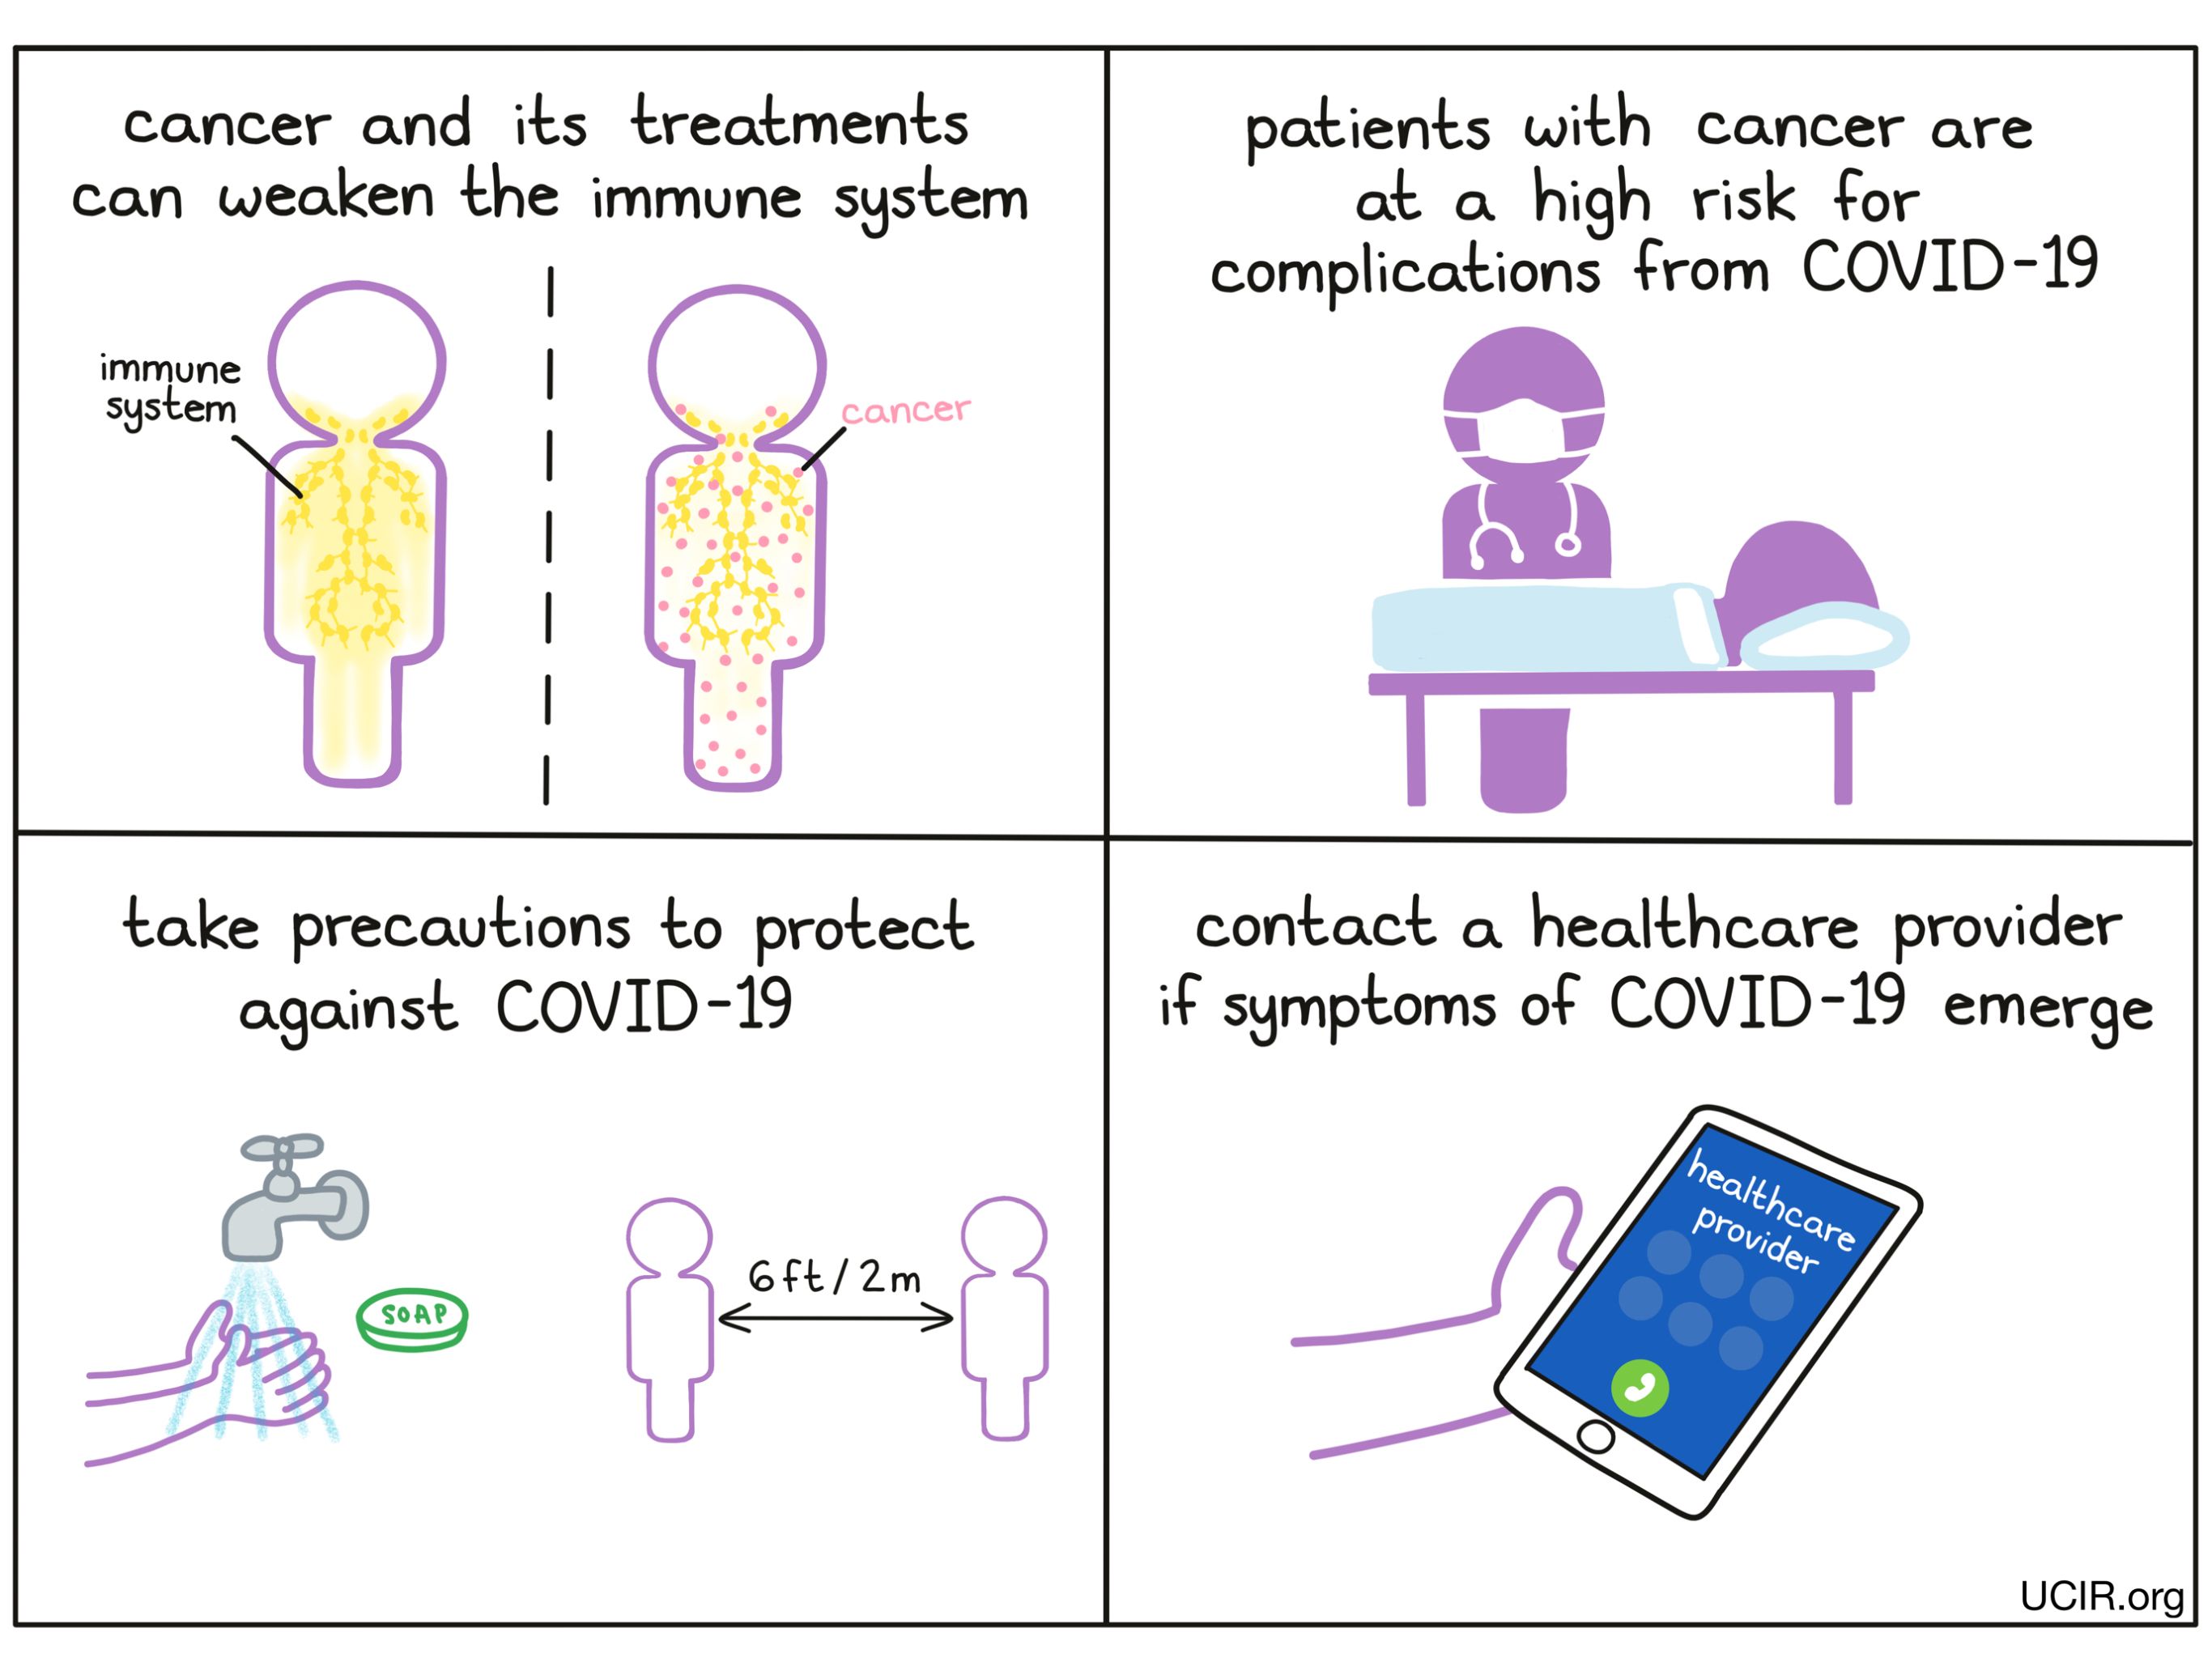 What is the Clinical Impact of COVID-19 on Cancer Patients?